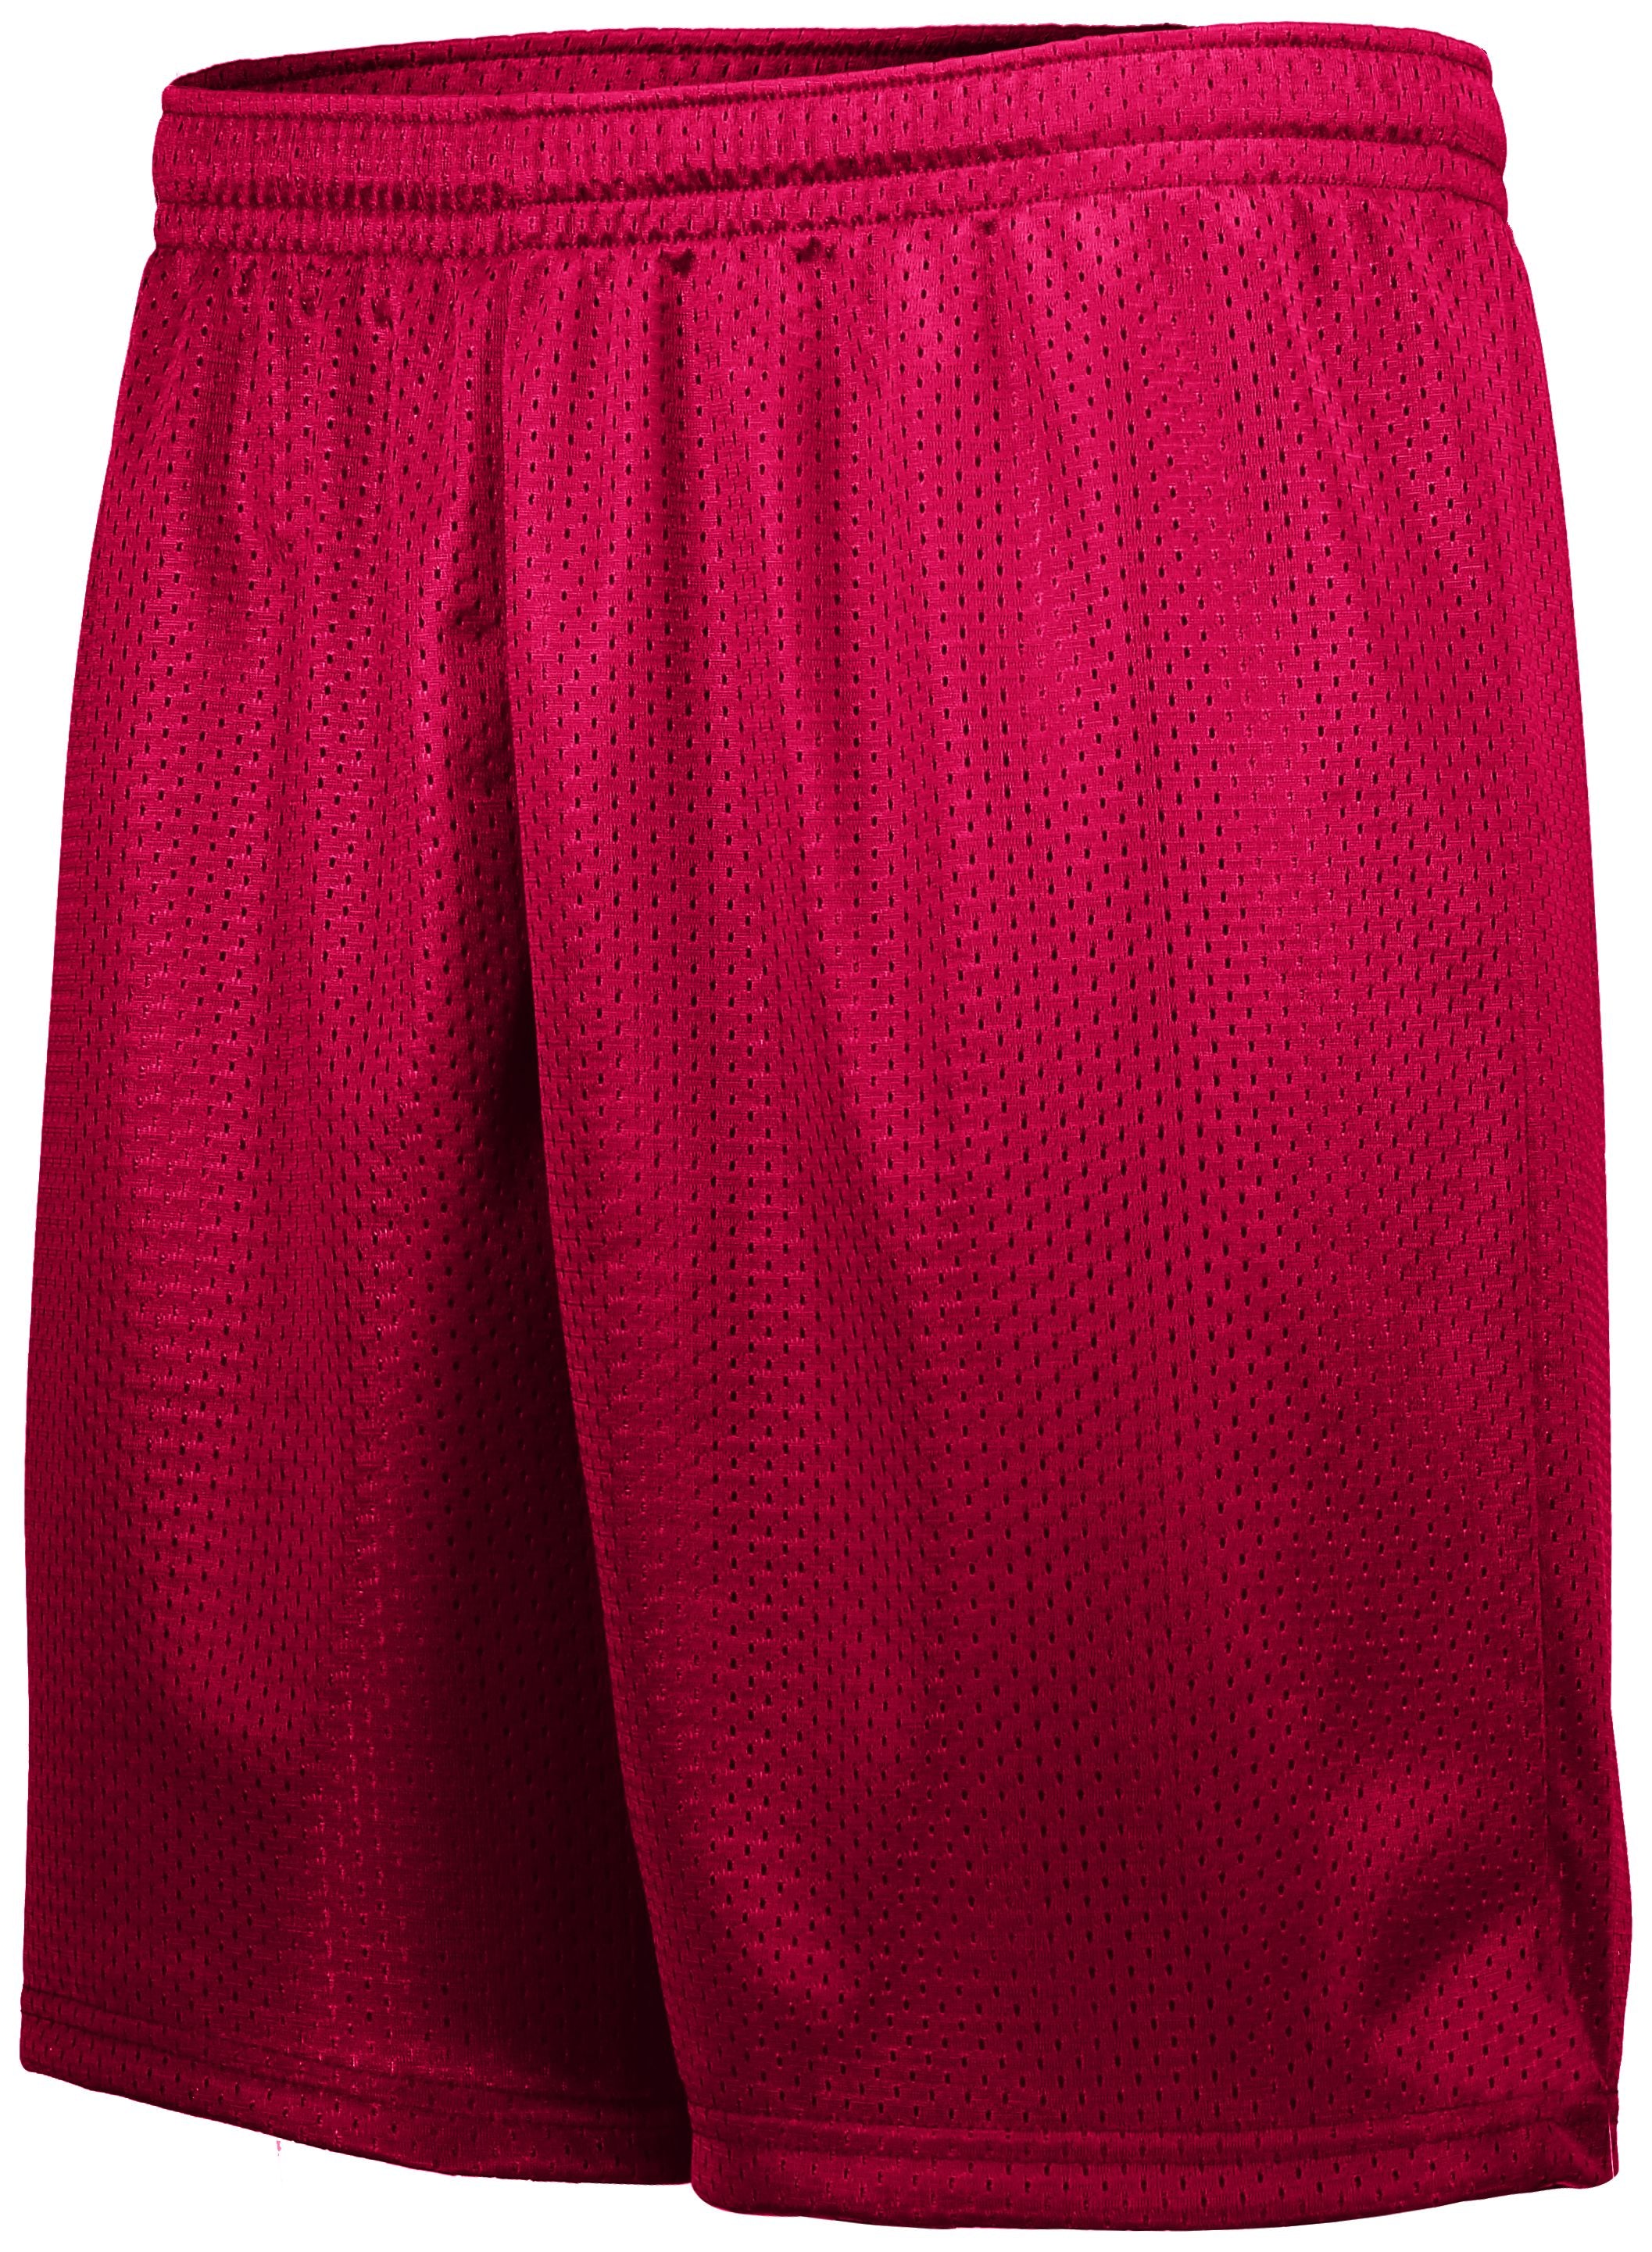 Augusta Sportswear Tricot Mesh Shorts in Red  -Part of the Adult, Adult-Shorts, Augusta-Products product lines at KanaleyCreations.com